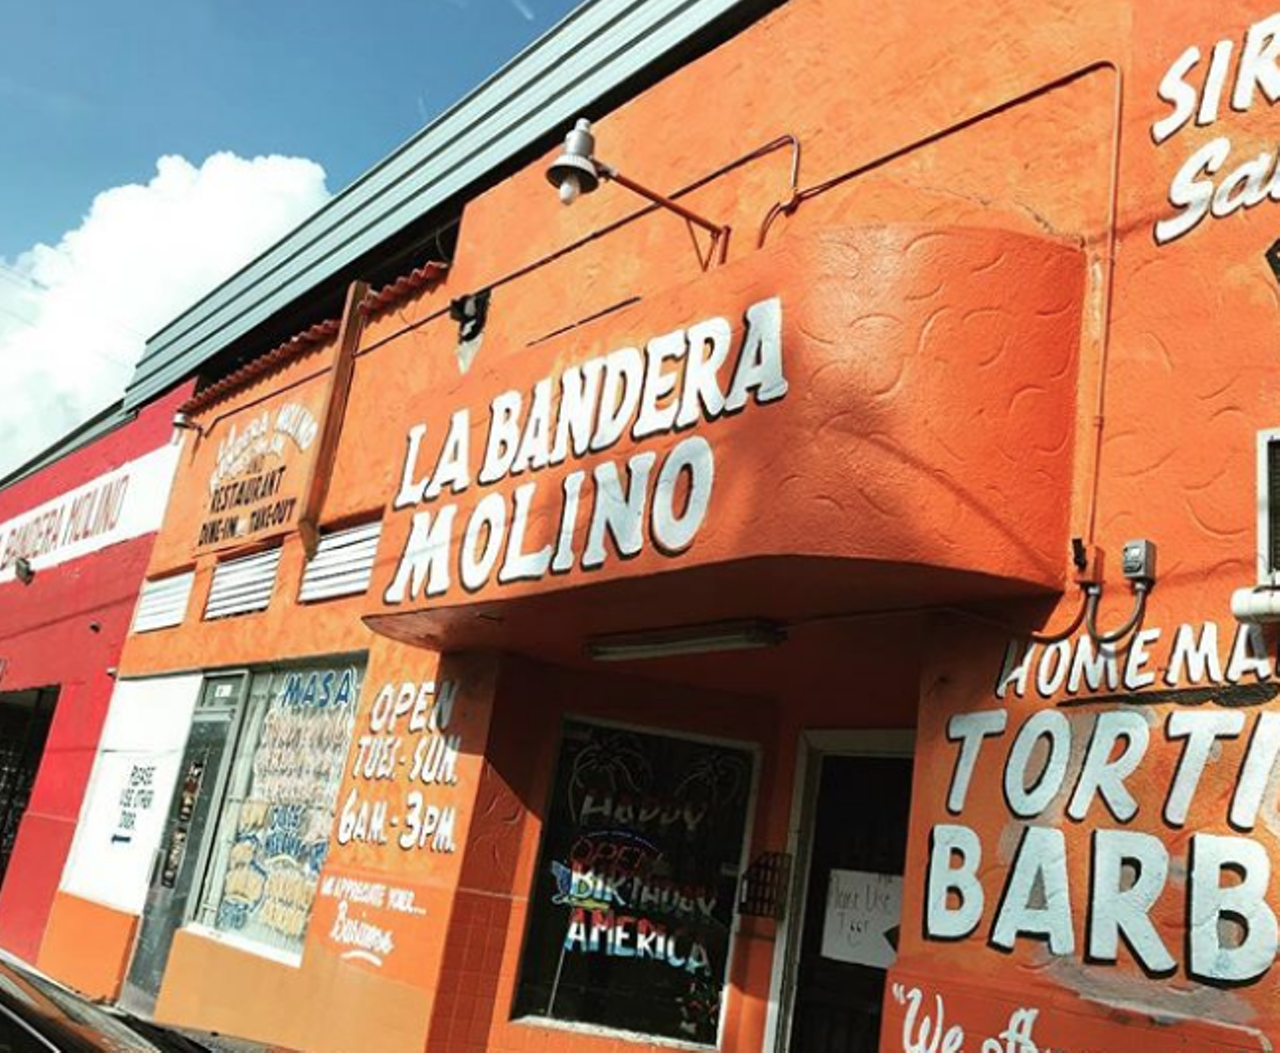 La Bandera Molino
2619 N Zarzamora St, (210) 434-0631
Fresh flour tortillas are definitely worth the wait at this shop which is stuffed to the brim with Mexican ingredients, cookware and more.
Photo via Instagram / iamdj_therapy210